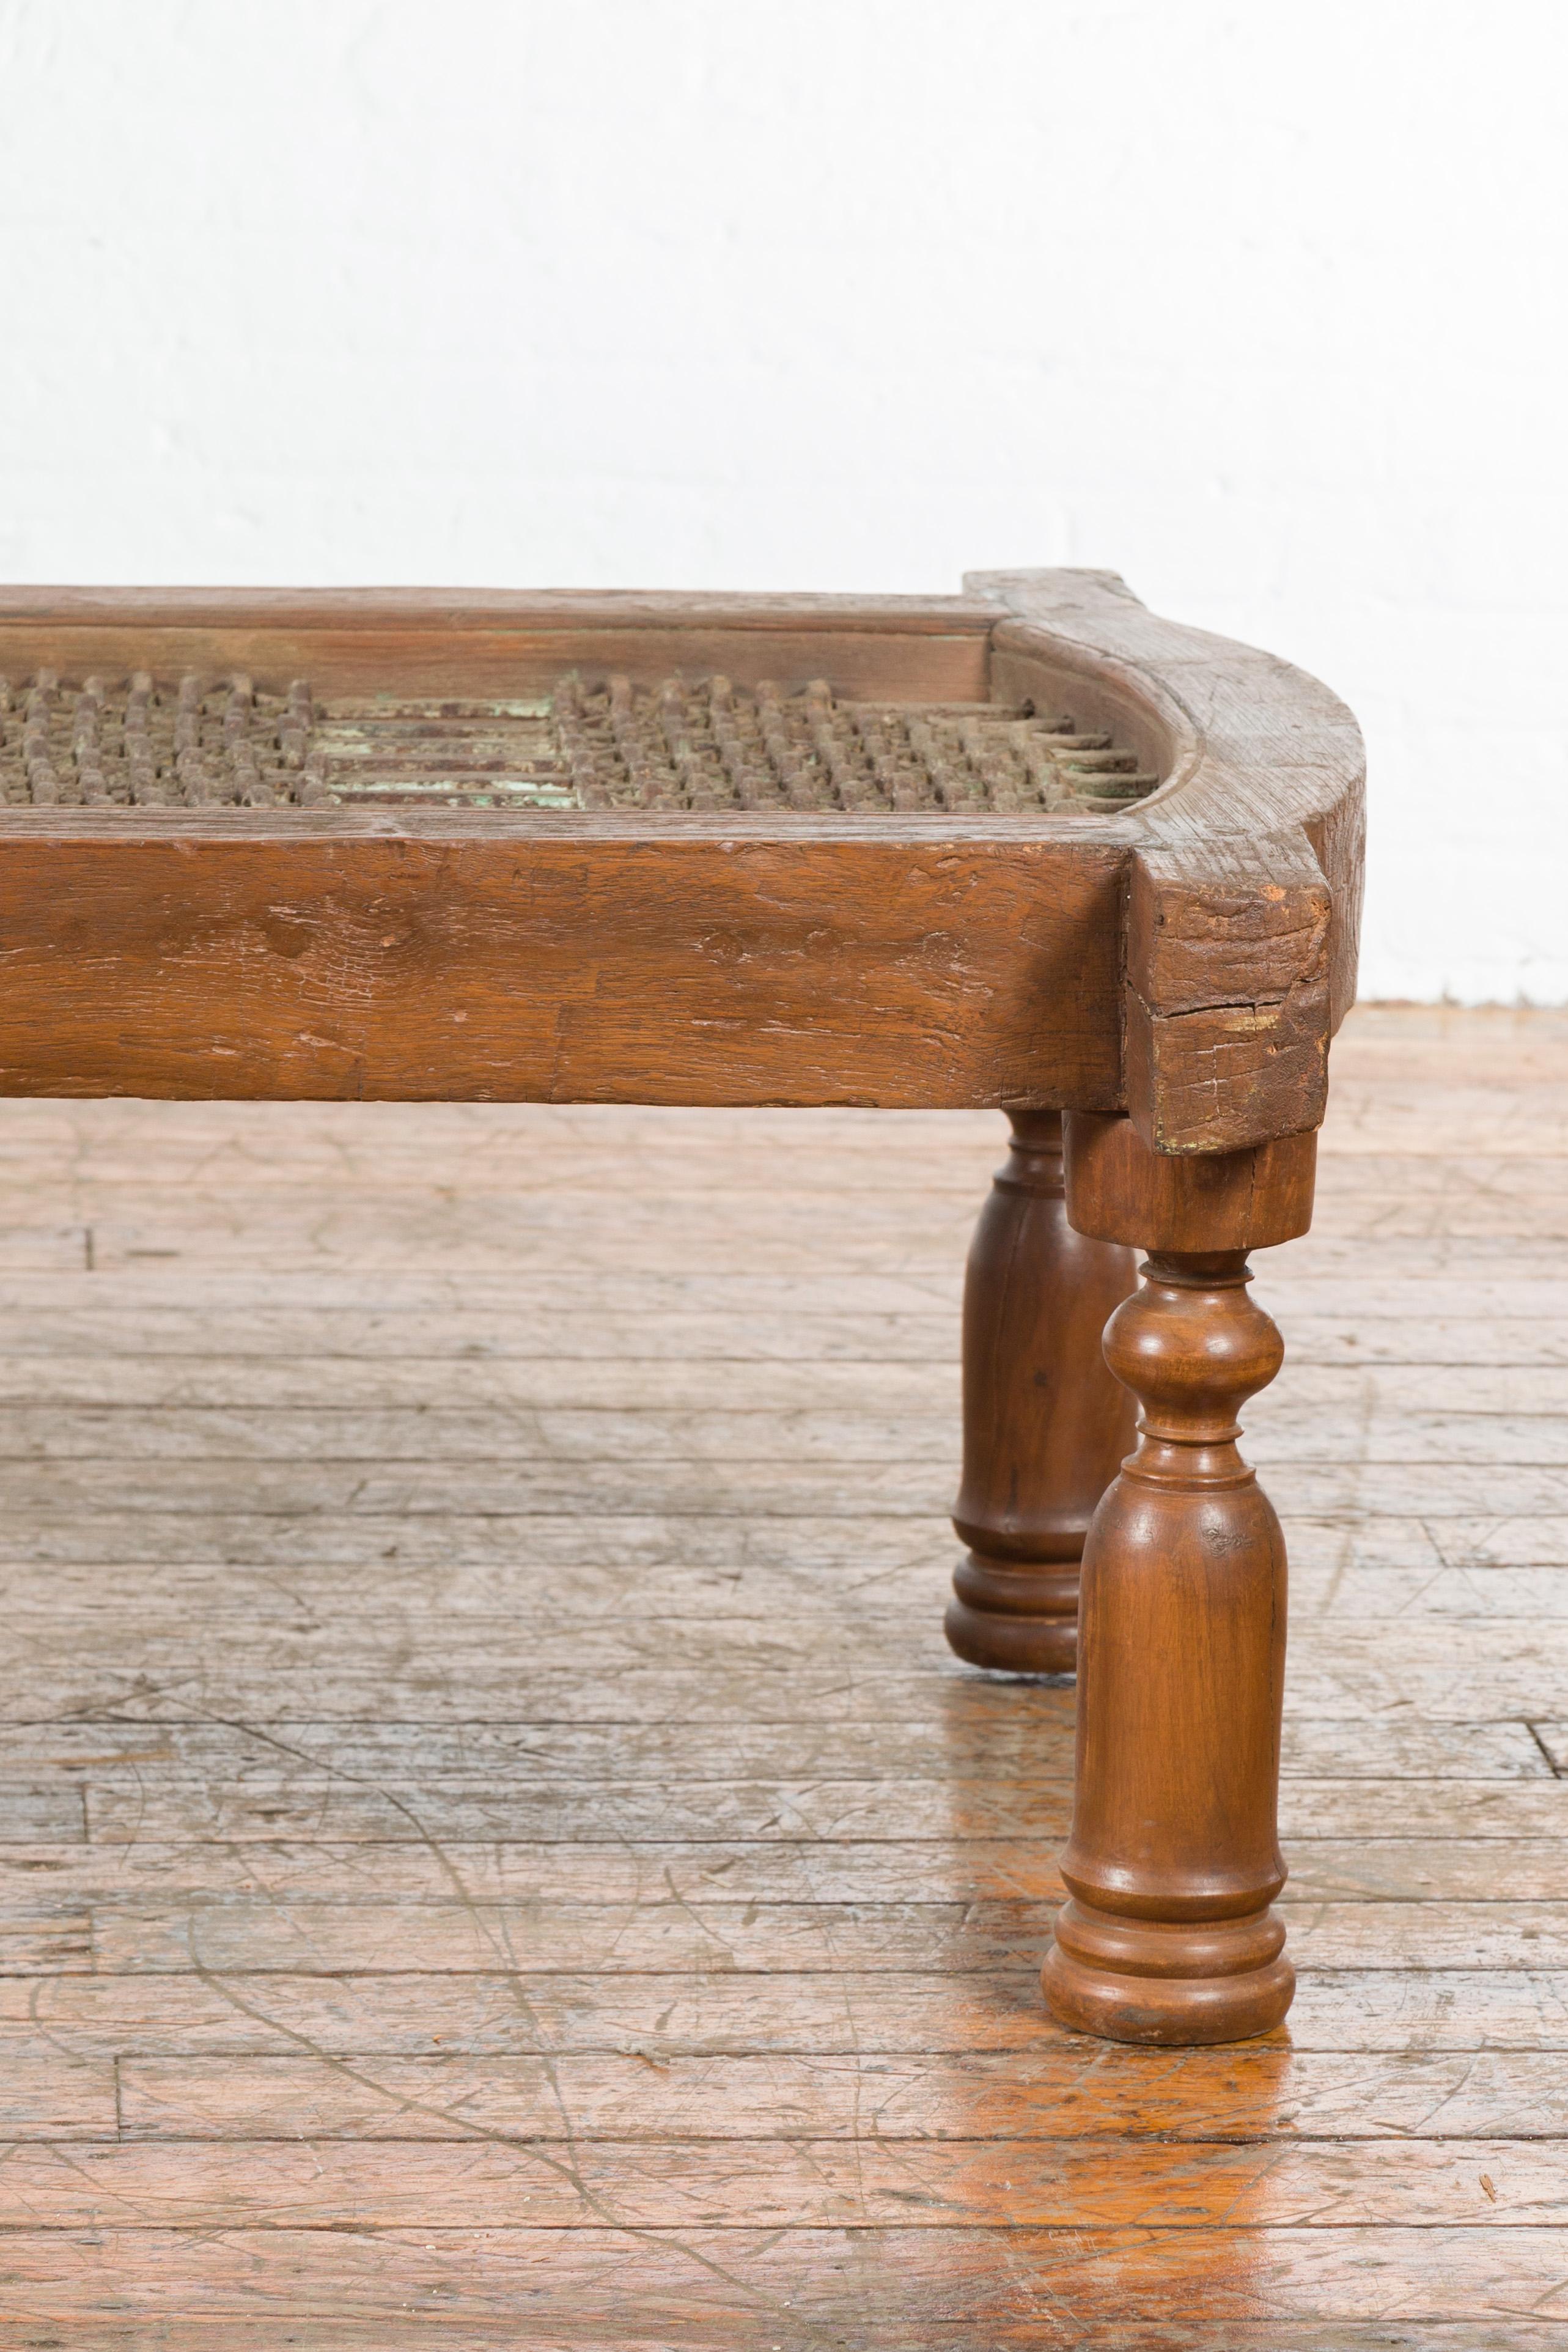 Rustic Antique Indian Arched Window Grate Made into a Coffee Table with Baluster Legs For Sale